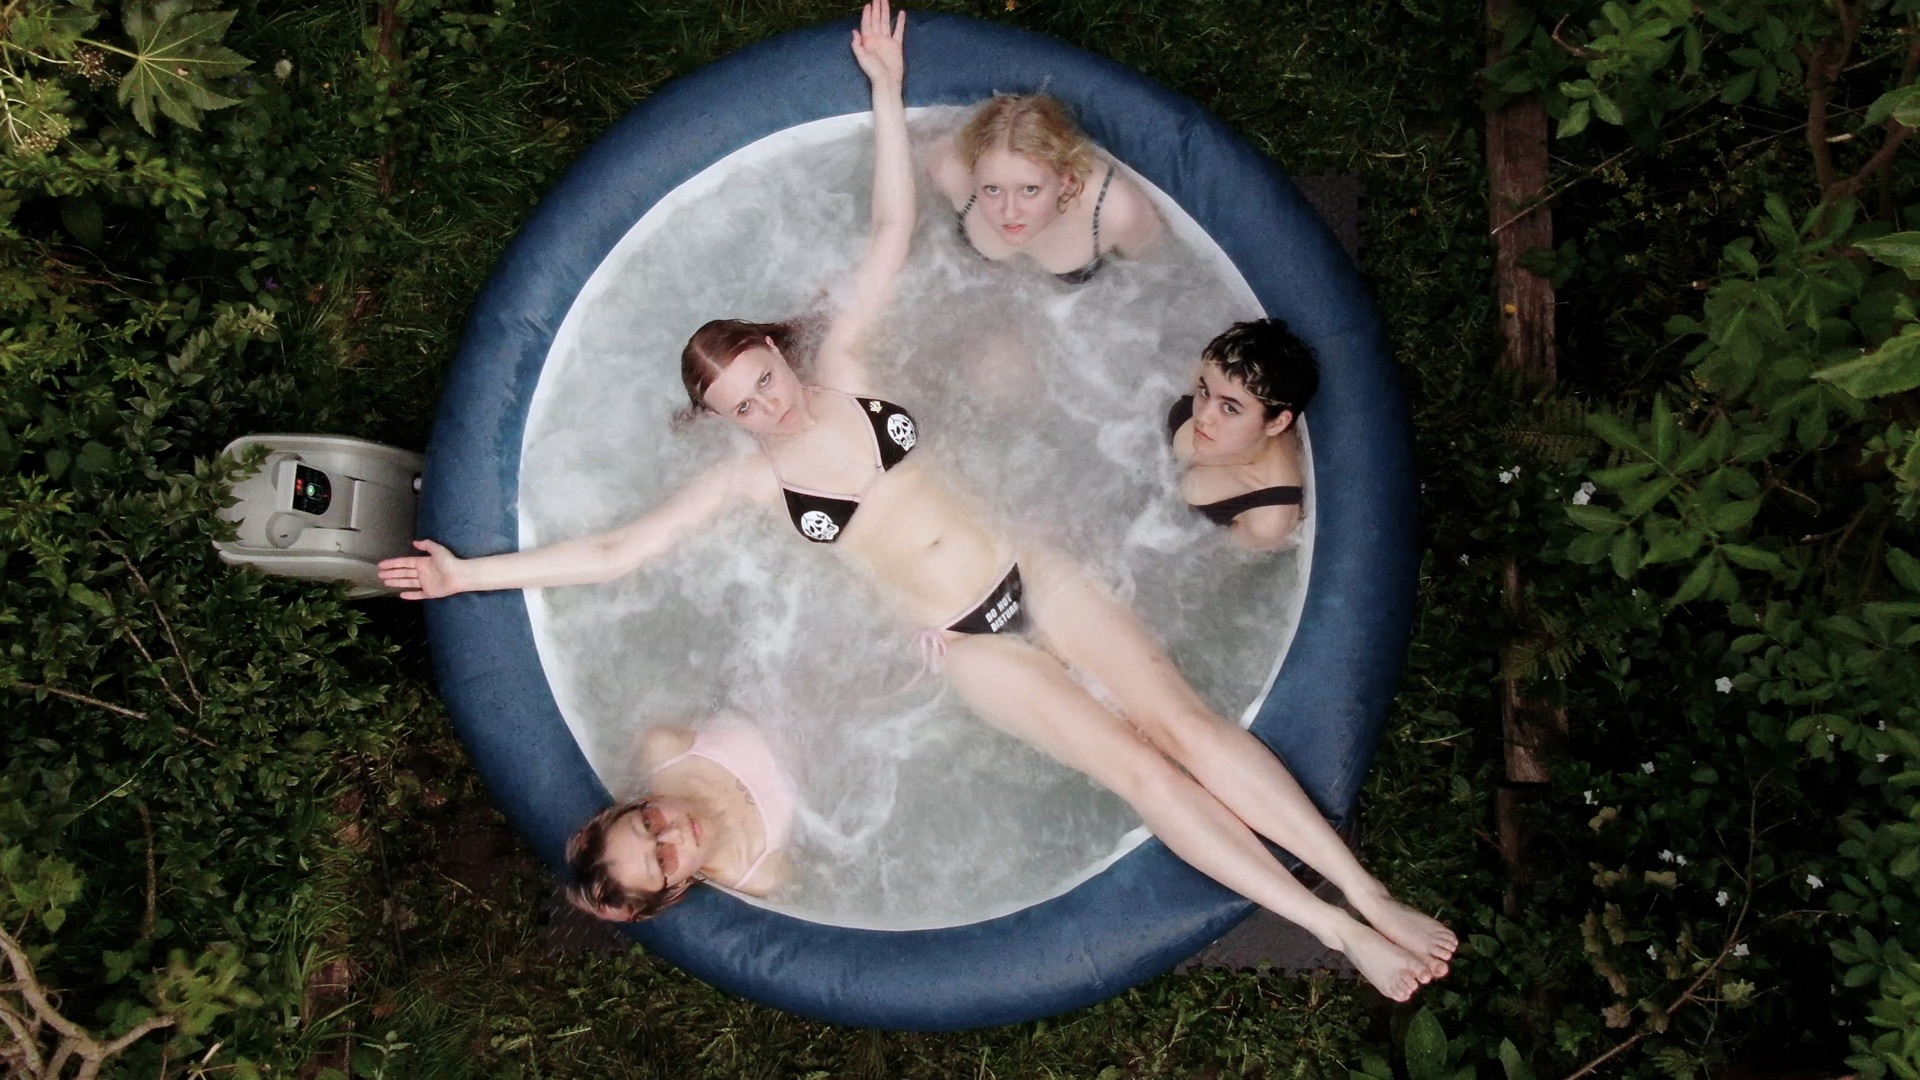 A bird's eye view of 4 people in a hot tub.